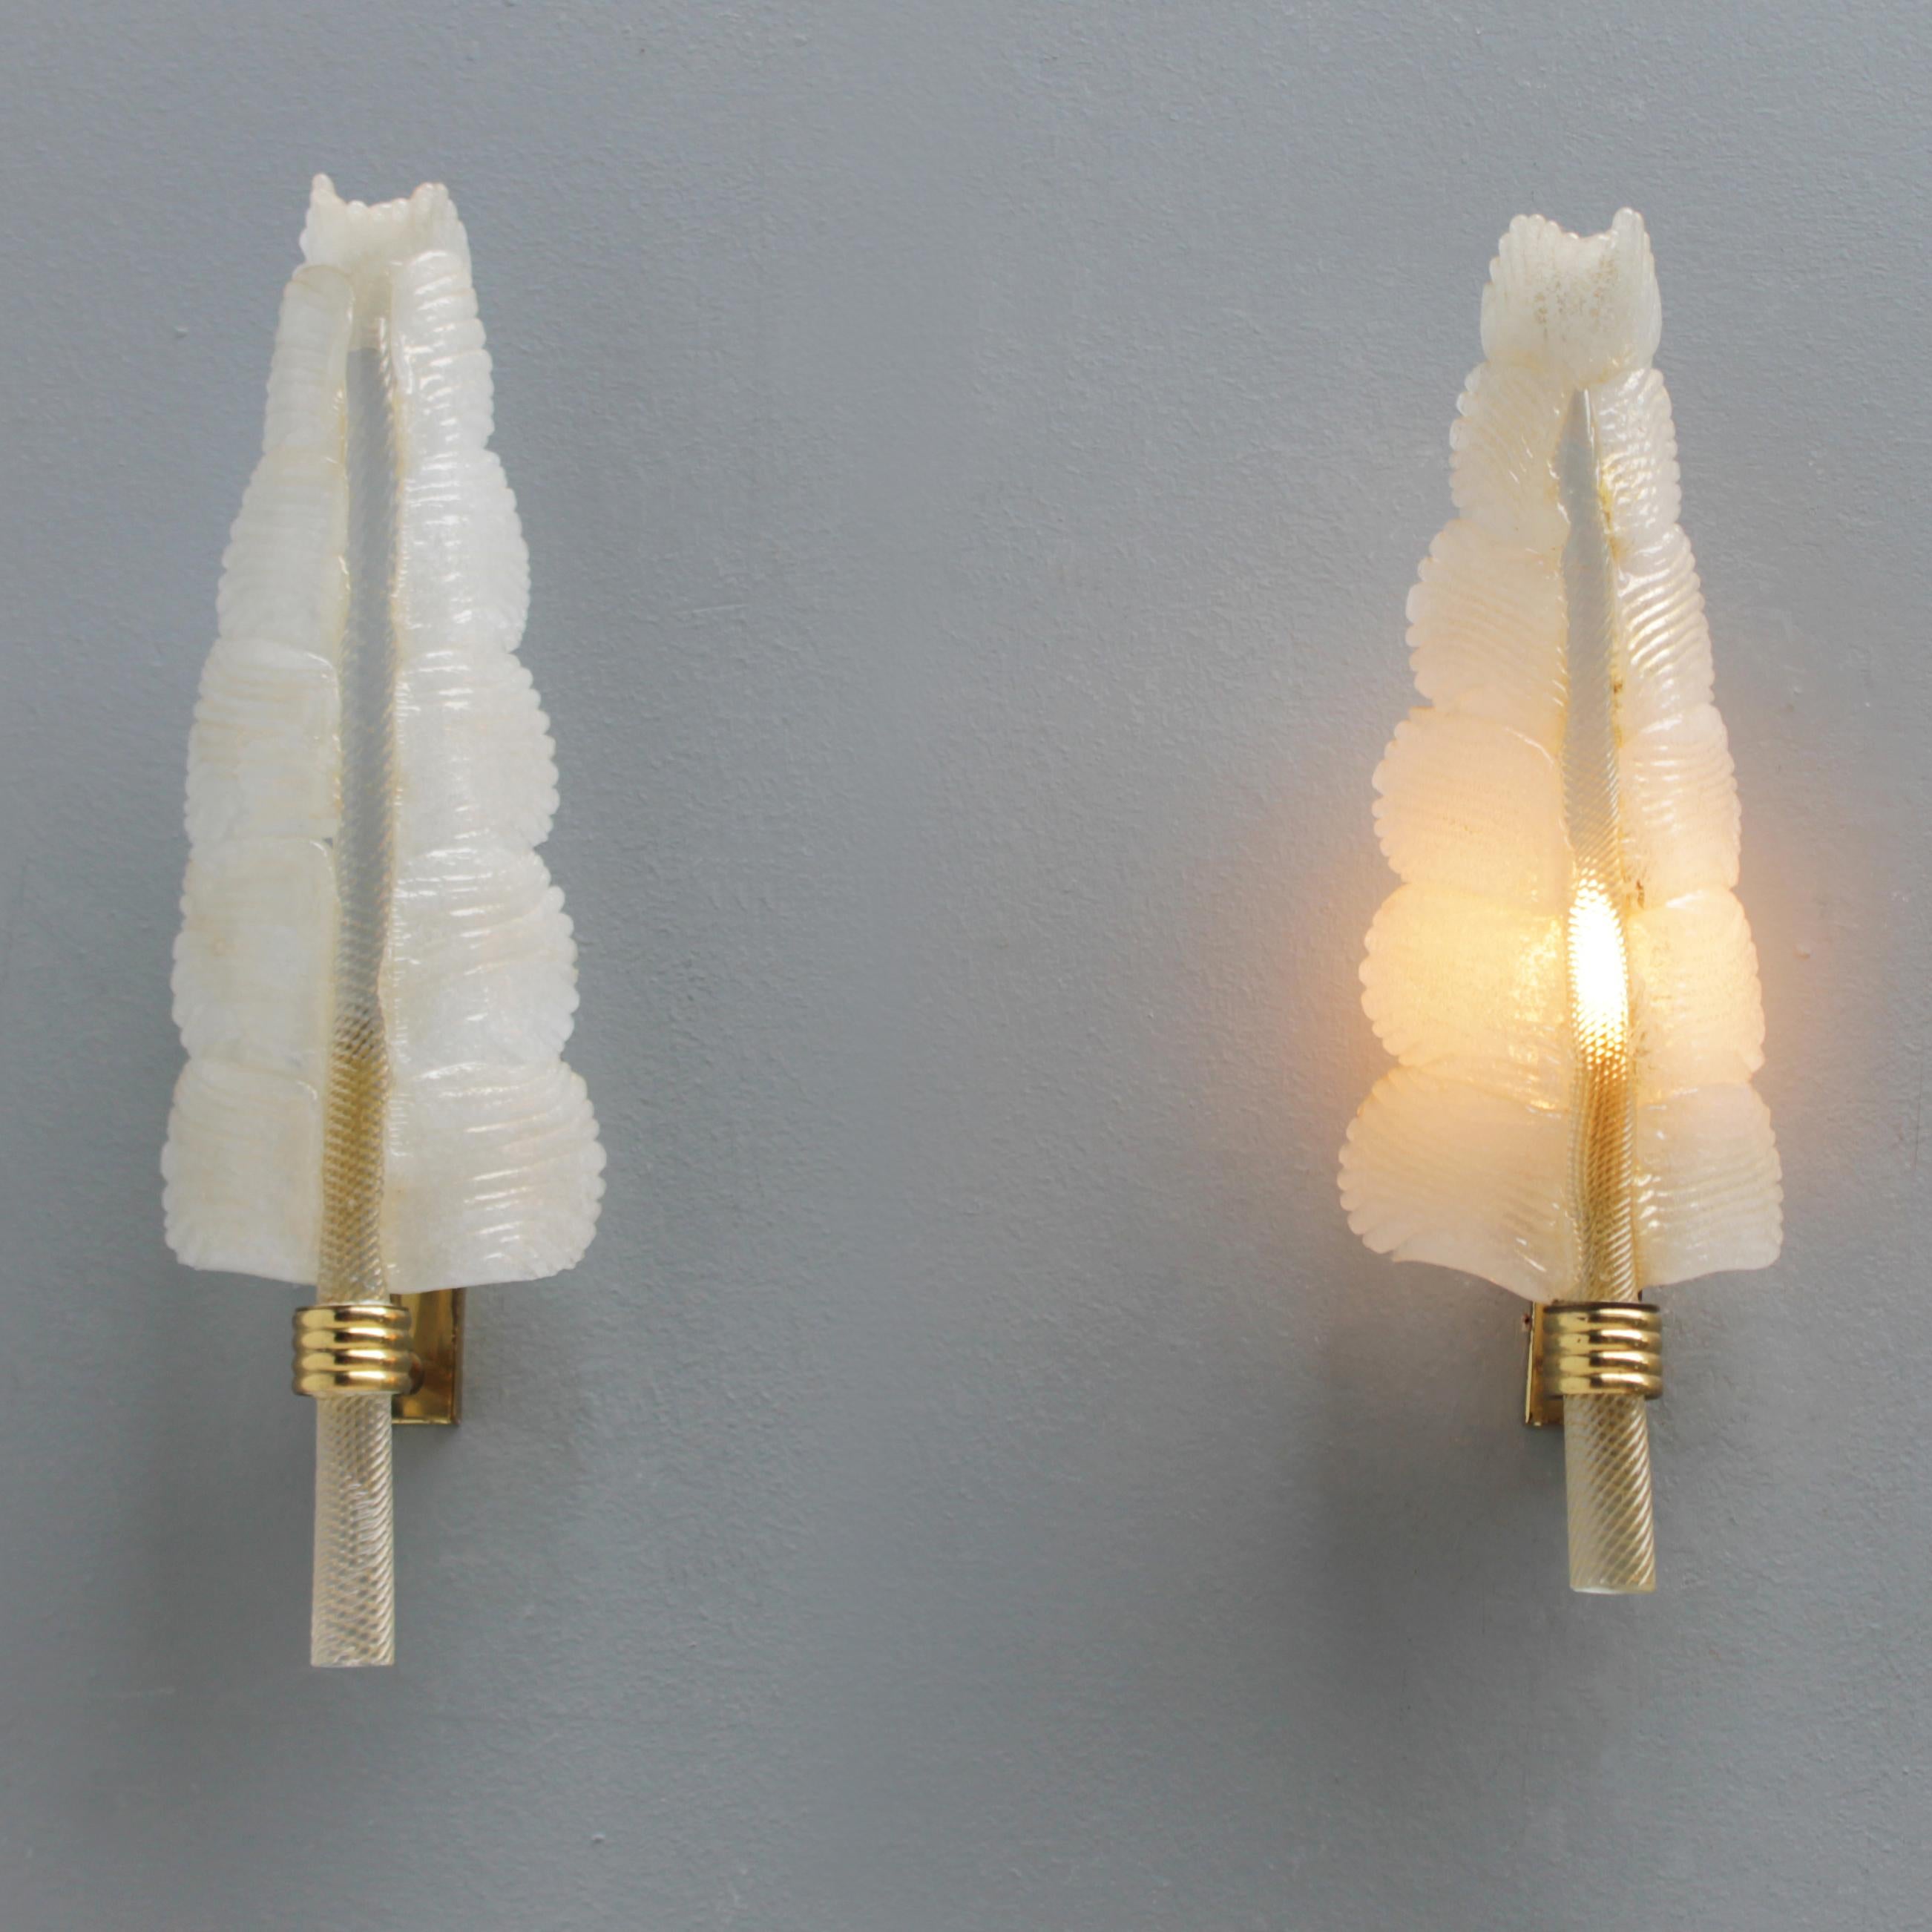 Pair of original Murano palm leaf shaped sconces by Barovier & Toso. Venice Italy, period 1945-1955. The glass is executed in 'avventurina': an old, yet complicated technique to infuse glass with very small gold particles, thus creating the subtle